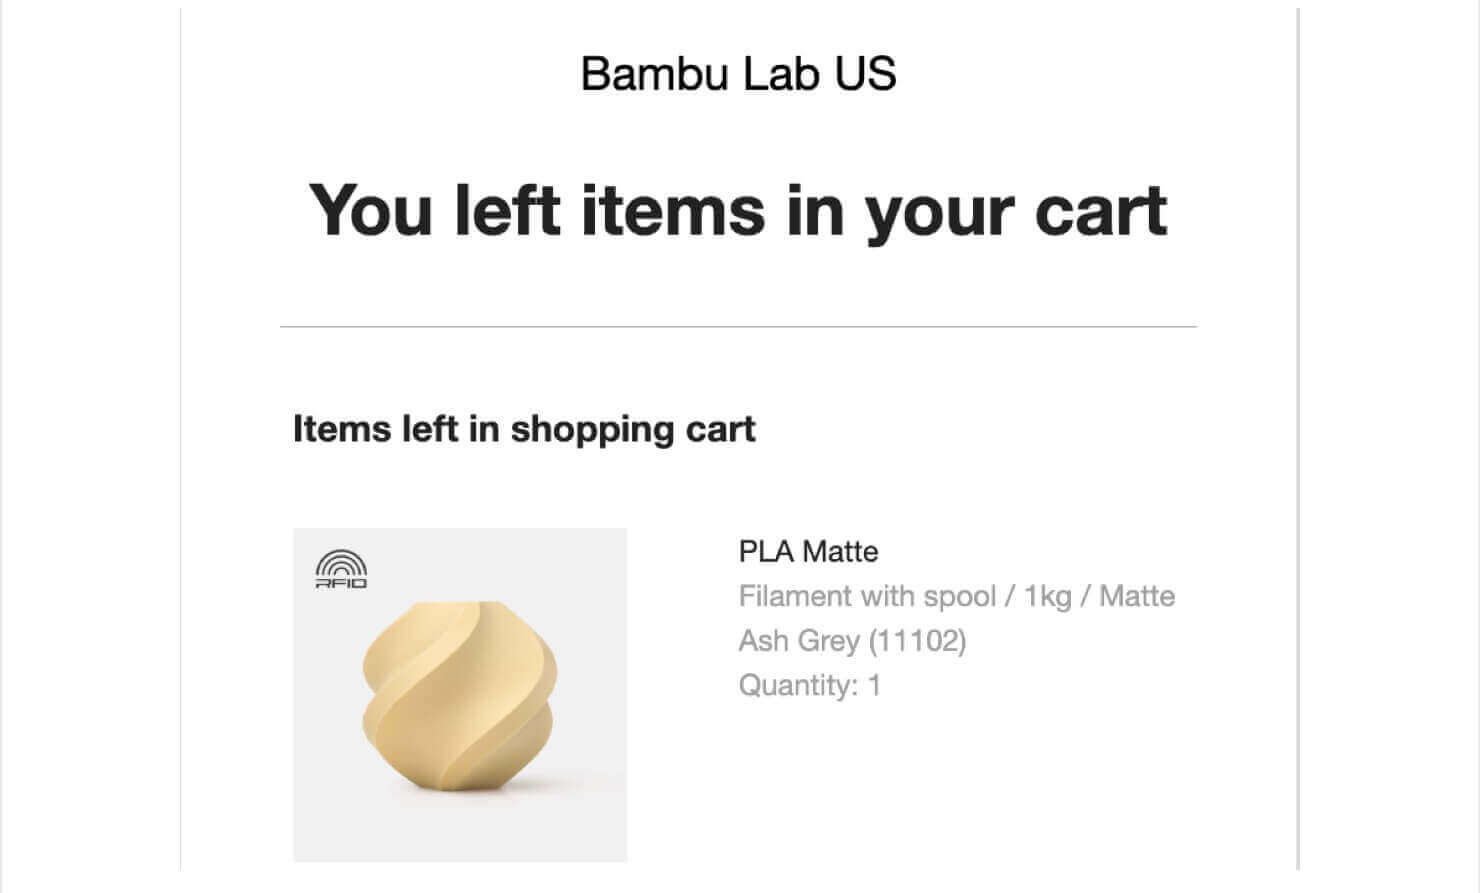 Email from Bambu Lab. A large heading says "You left items in your cart." Then it says "Items left in shopping cart," followed by a list of products.